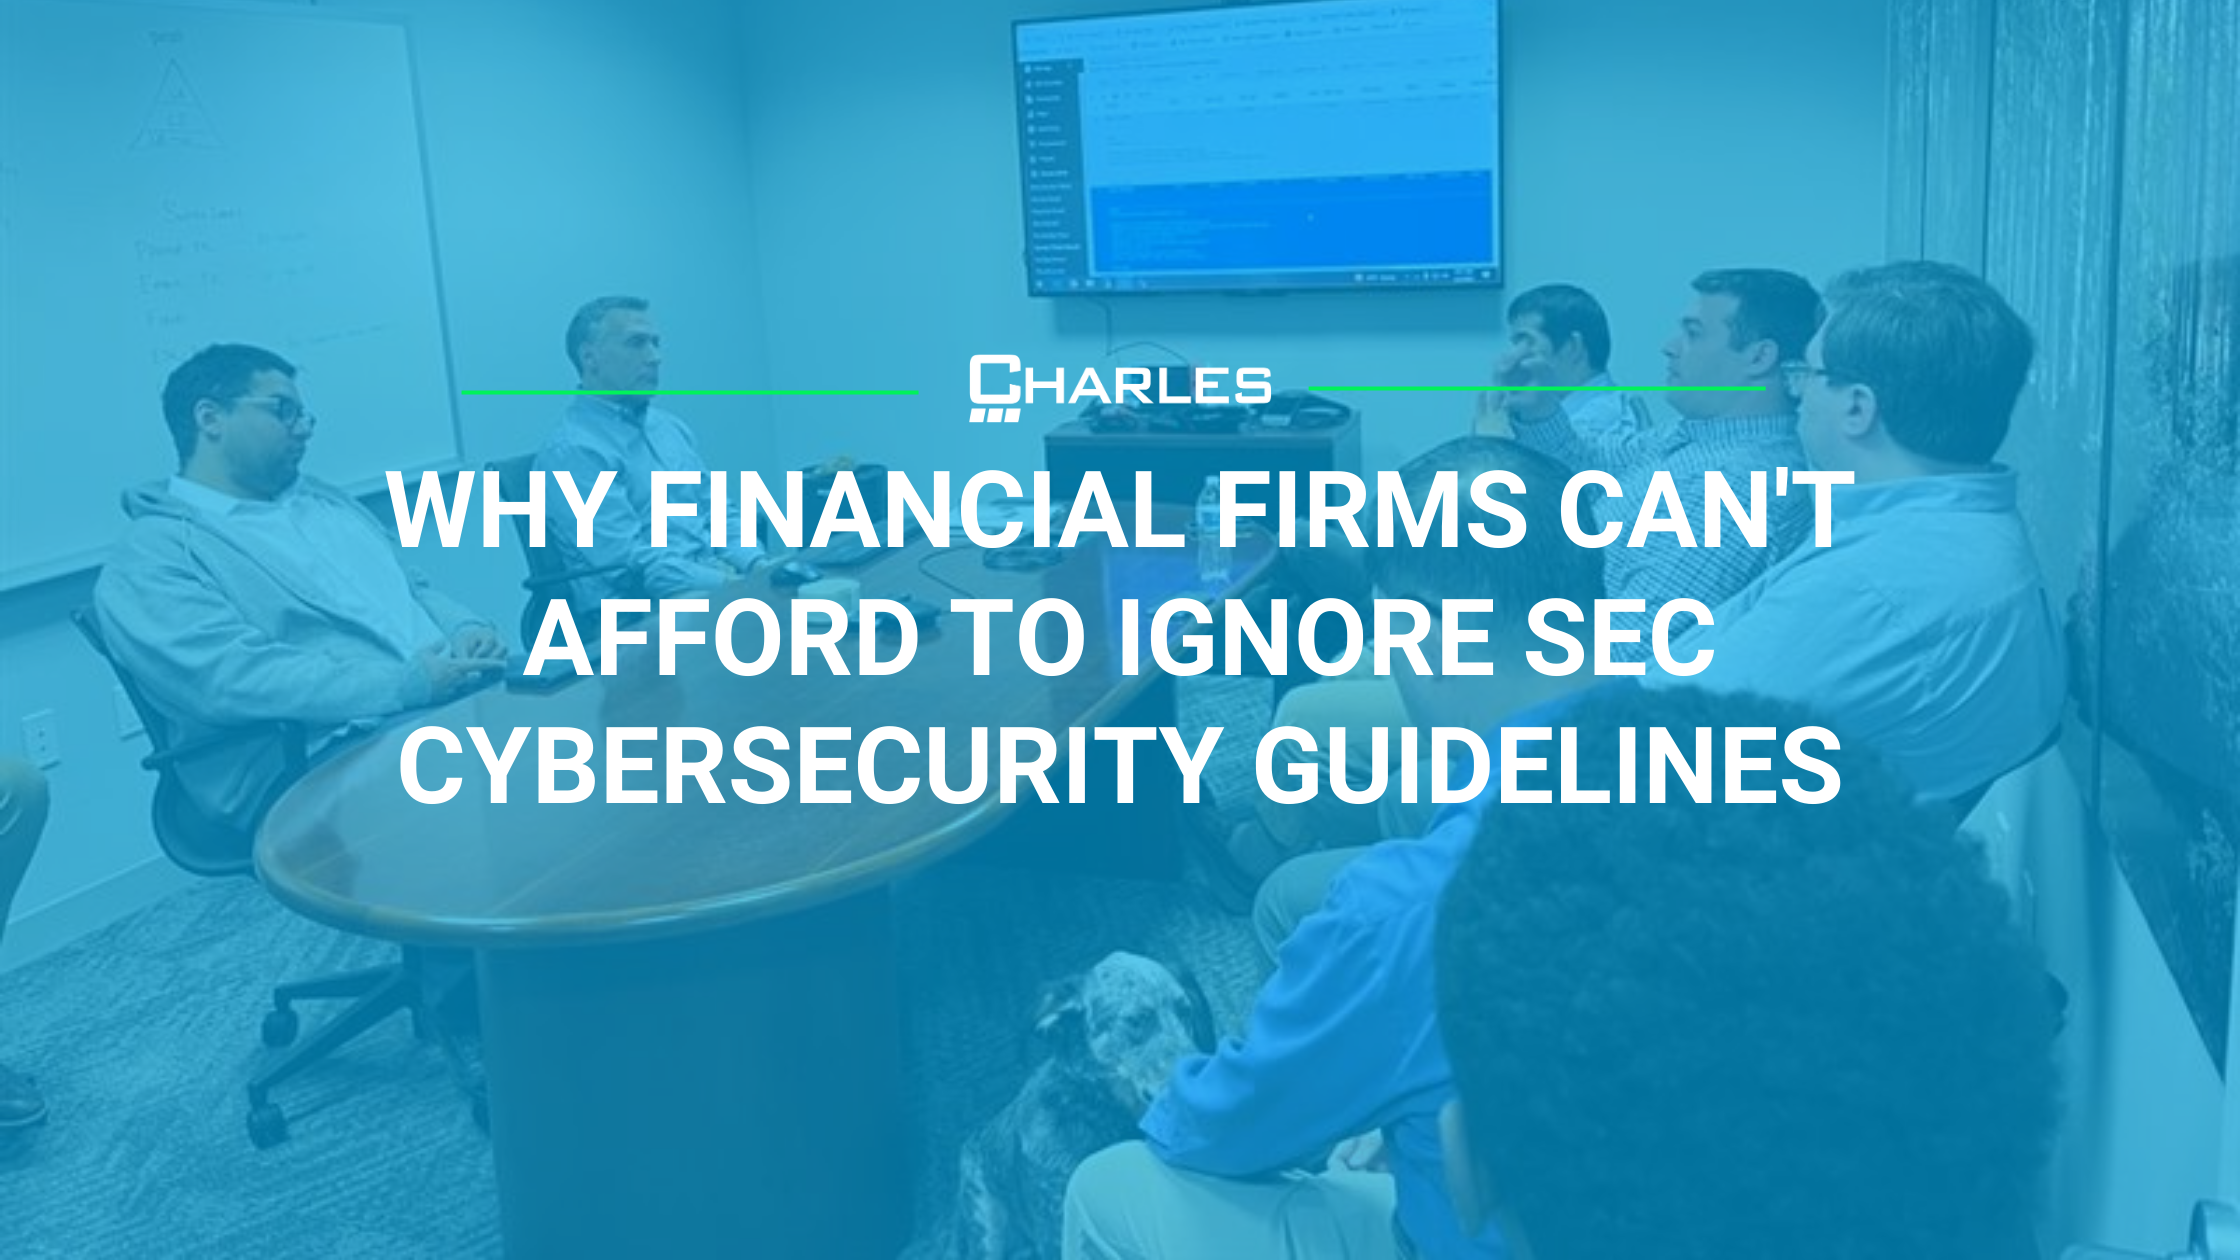 Why Financial Firms Can’t Afford to Ignore SEC Cybersecurity Guidelines